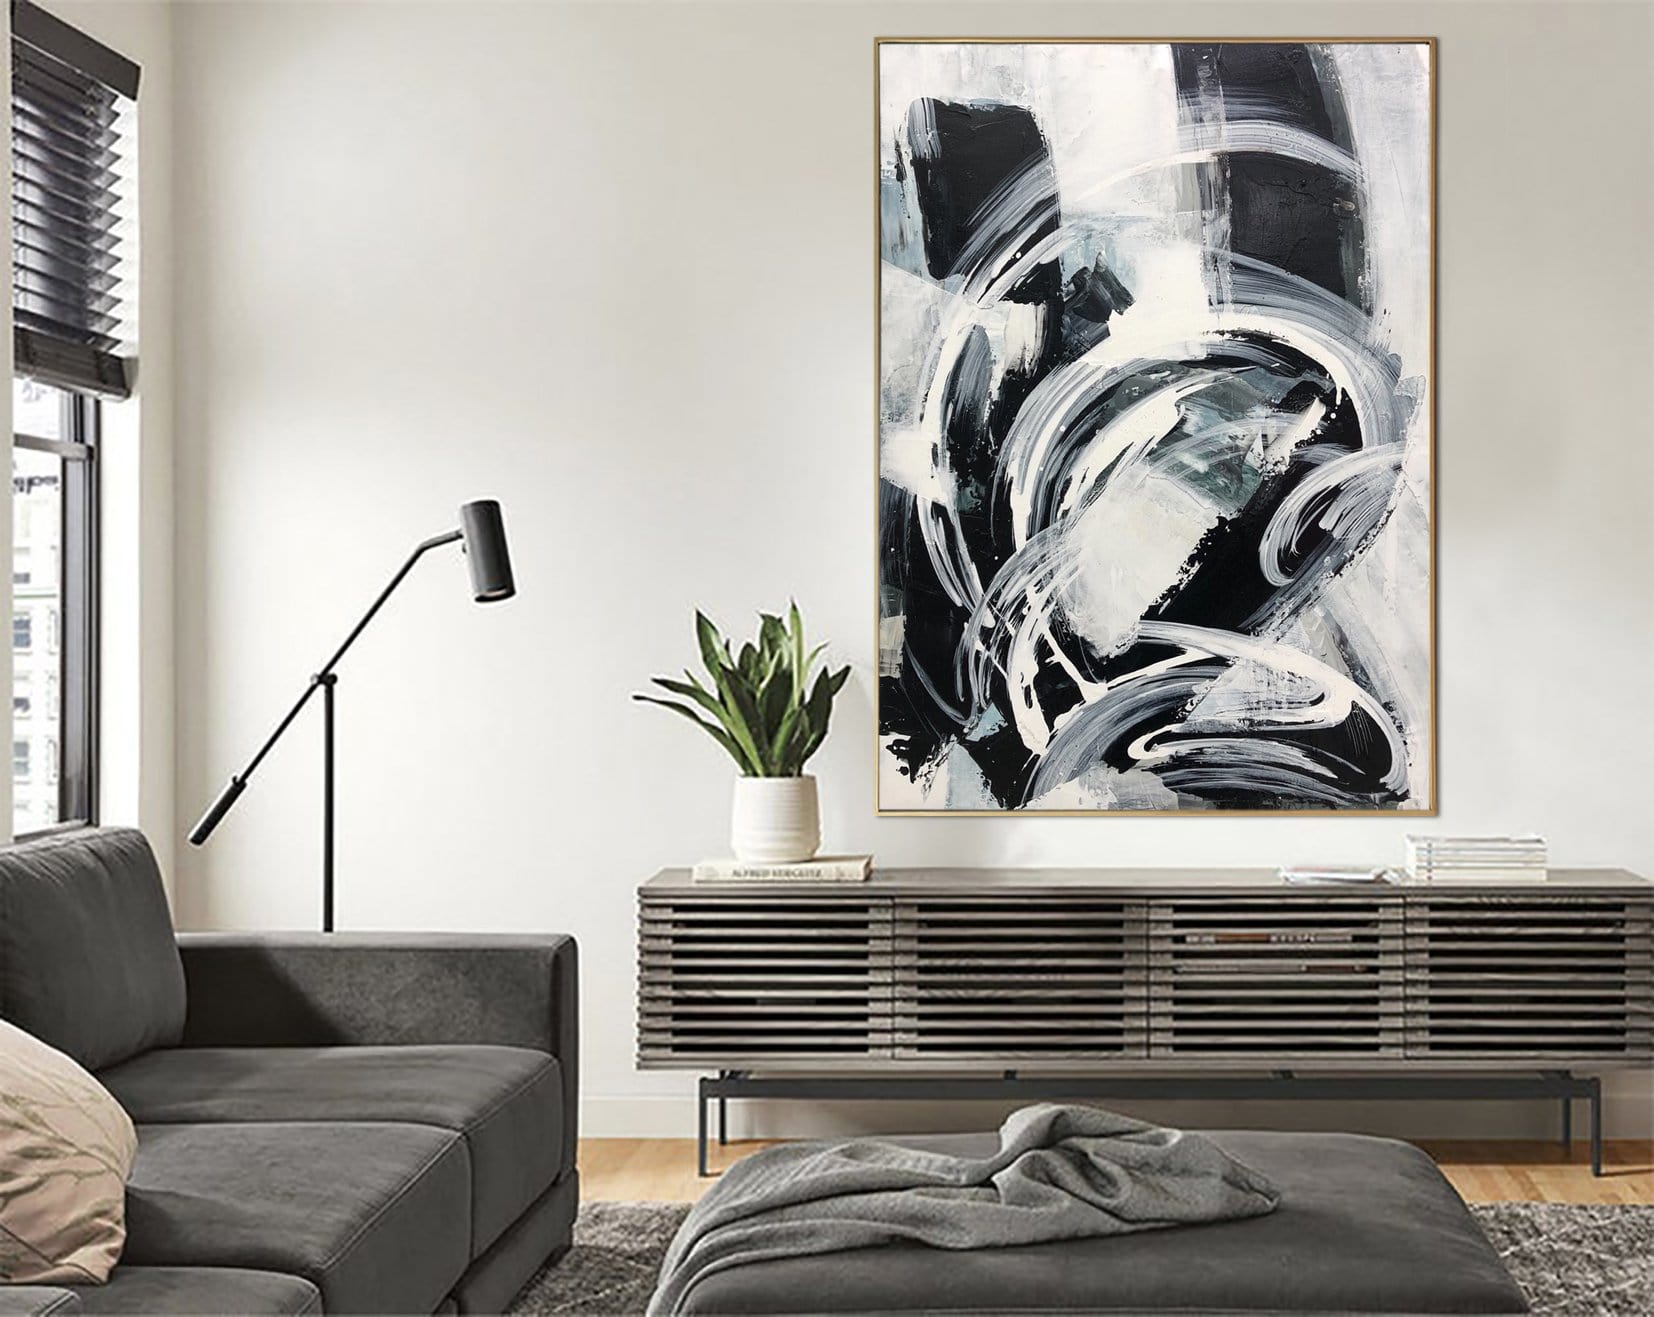 Original Painting on Canvas Black and White Wall Art Canvas Grey Artwo